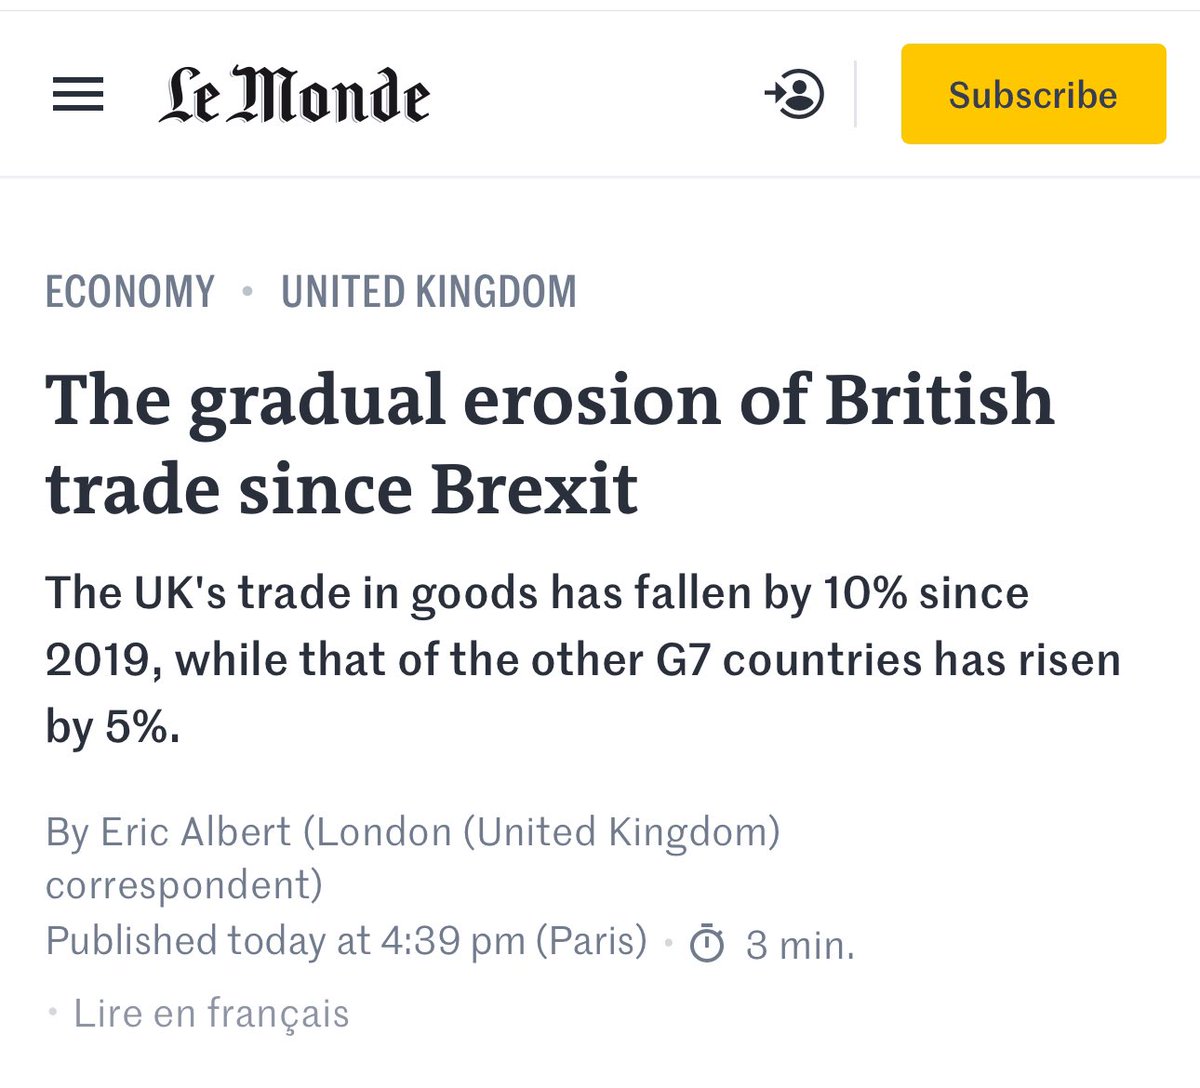 Brexit has to be the biggest mis-selling adventure in history. The Tories are now getting their comeuppance from offering Brexit boosterism which was always ‘sweets laced with poison’. Keep the receipts, broken promises can be forgiven but never forgotten.…